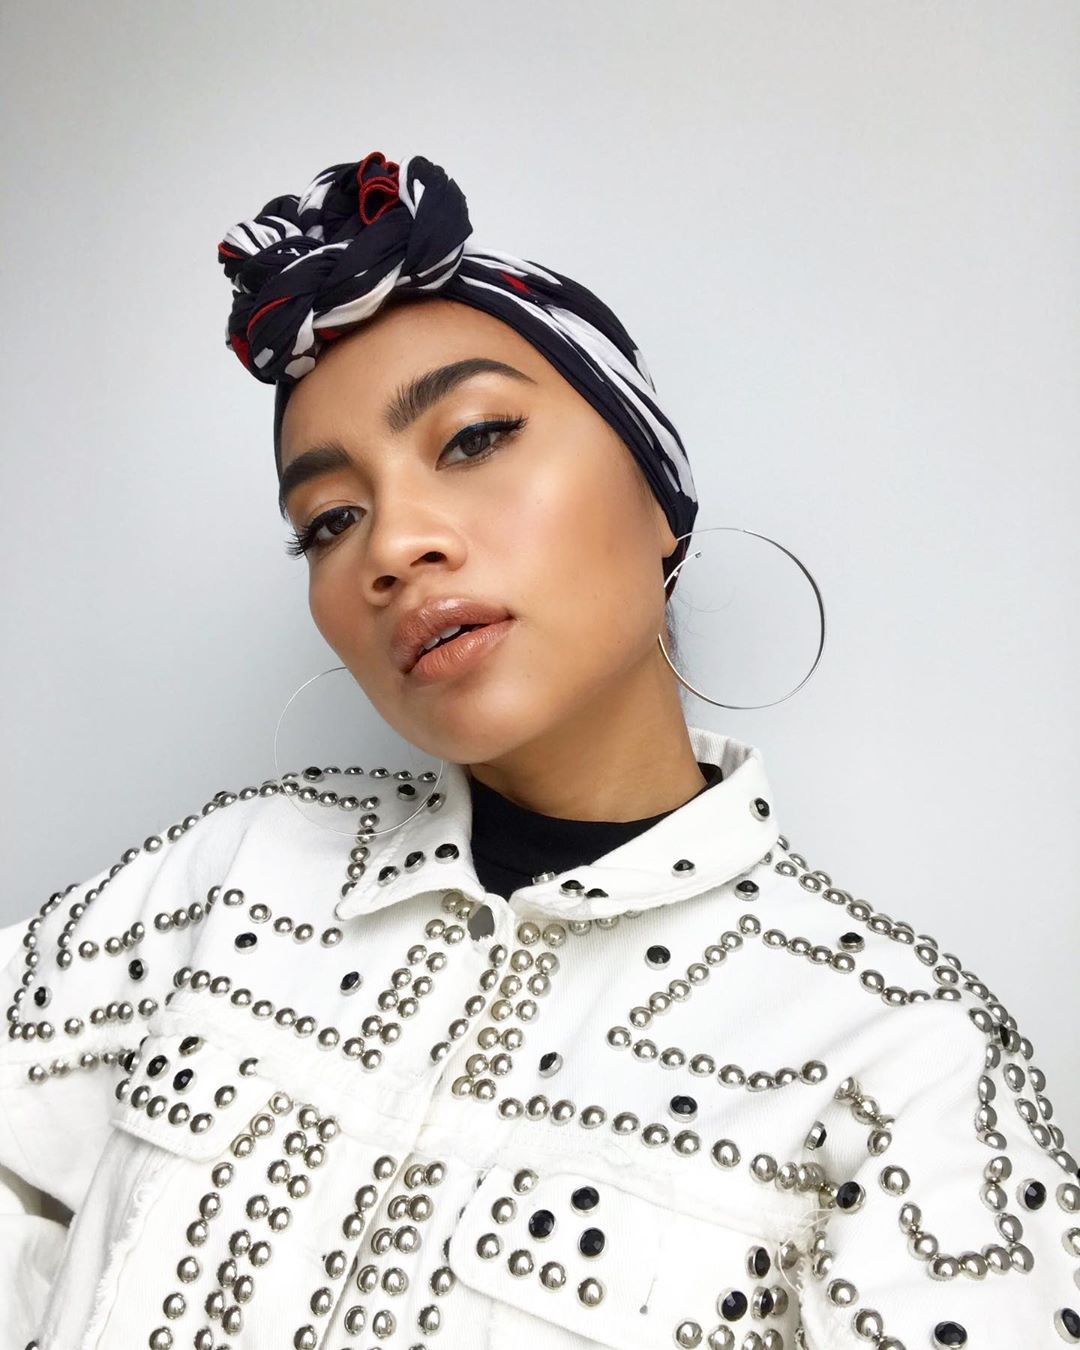 Malaysian singer/songwriter Yuna, whose fourth studio album, Rouge, was released on July 12, is captivating the world again with her dreamy, soulful R&B pop sound. Photo: Instagram/Yuna